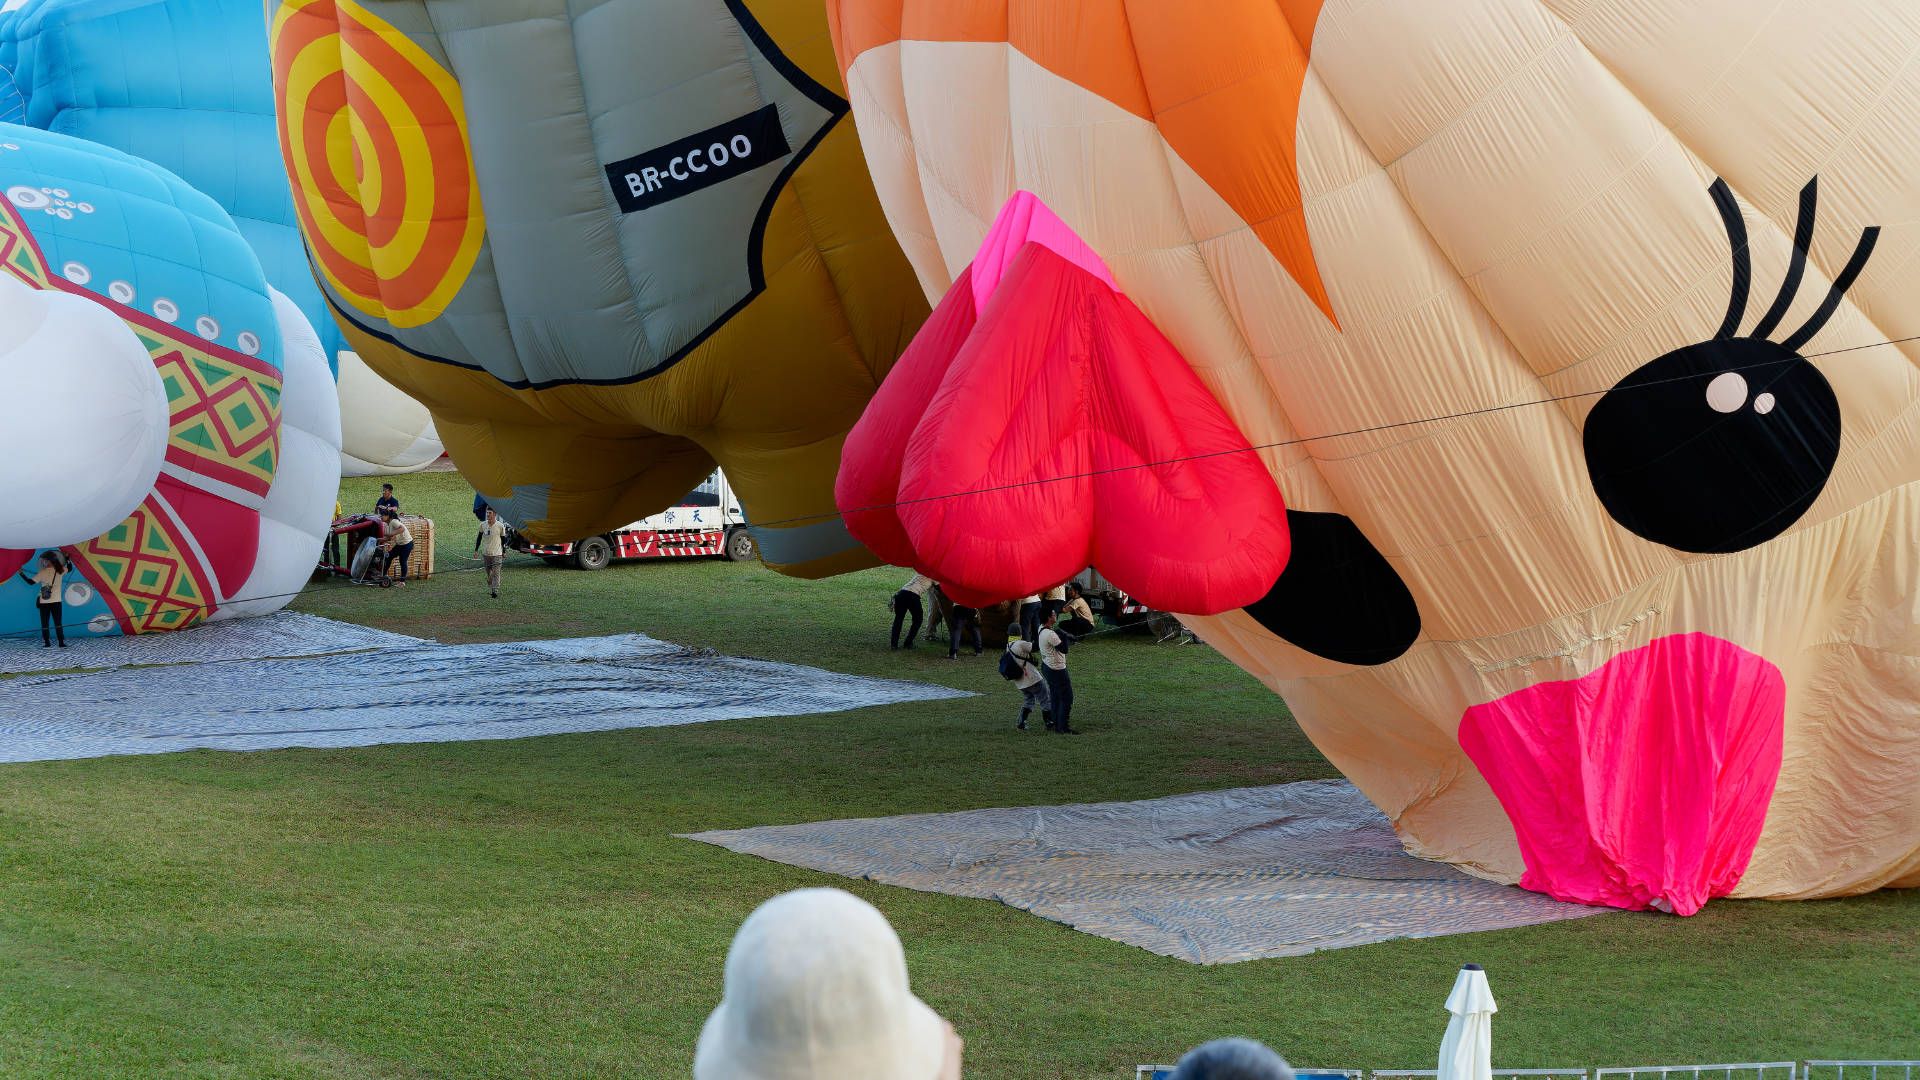 A partially-inflated cartoon bird-shaped hot air balloon begins to rise off the ground.